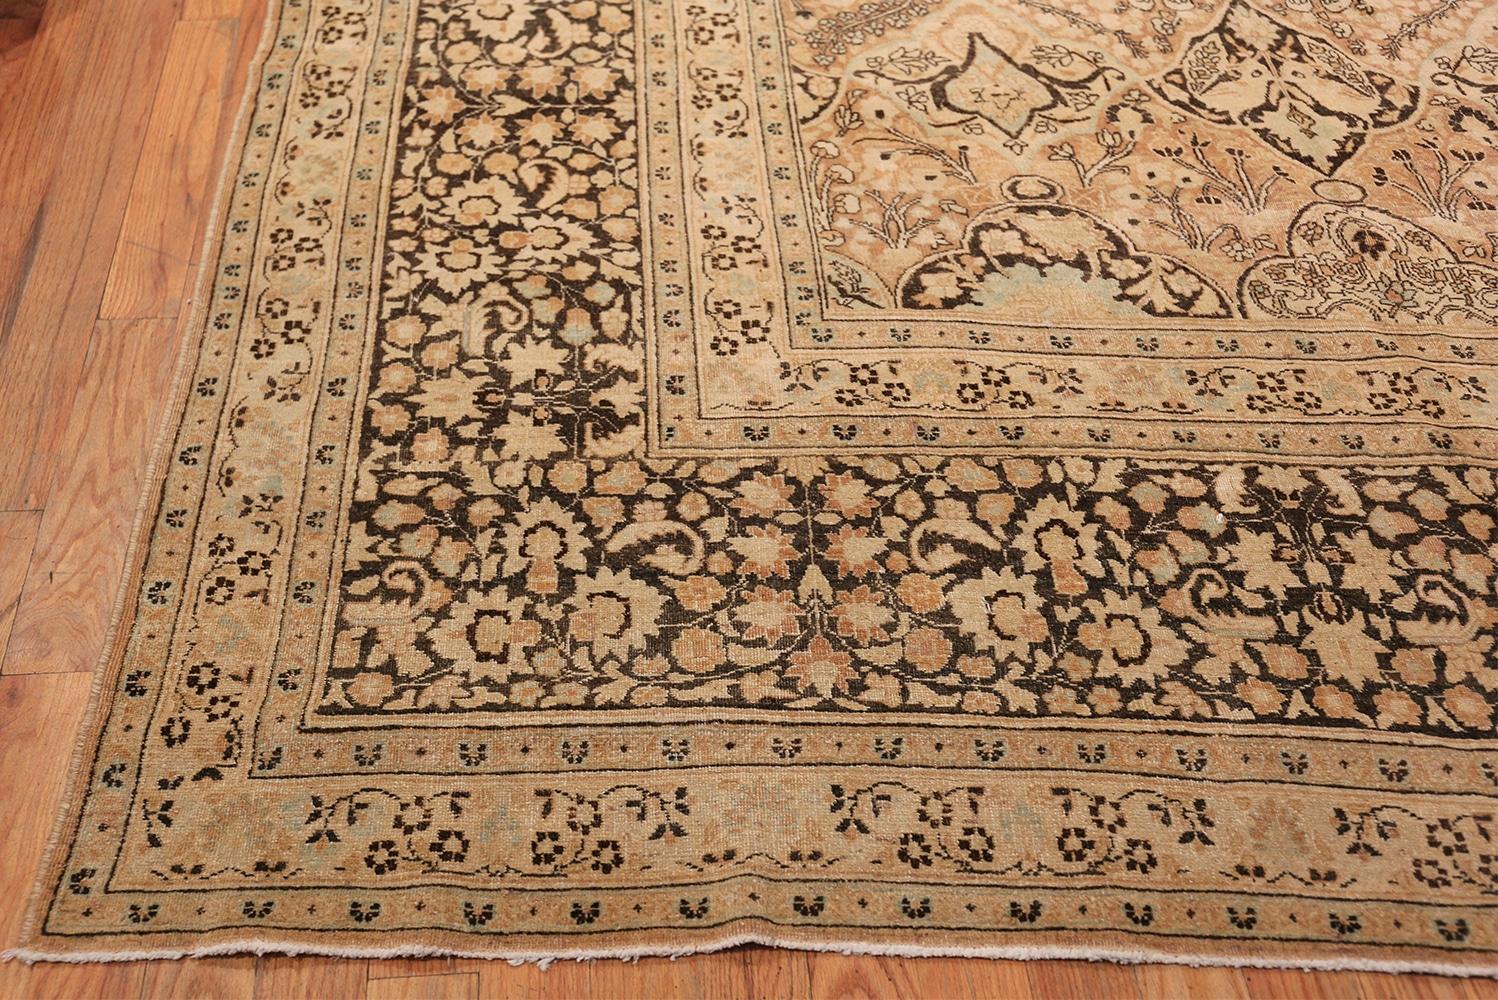 Extremely Decorative Large Oversized Antique Persian Khorassan Rug, Country of Origin / Rug Type: Persian Rugs, Circa Date: 1920. Size: 13 ft 4 in x 27 ft 4 in (4.06 m x 8.33 m)

